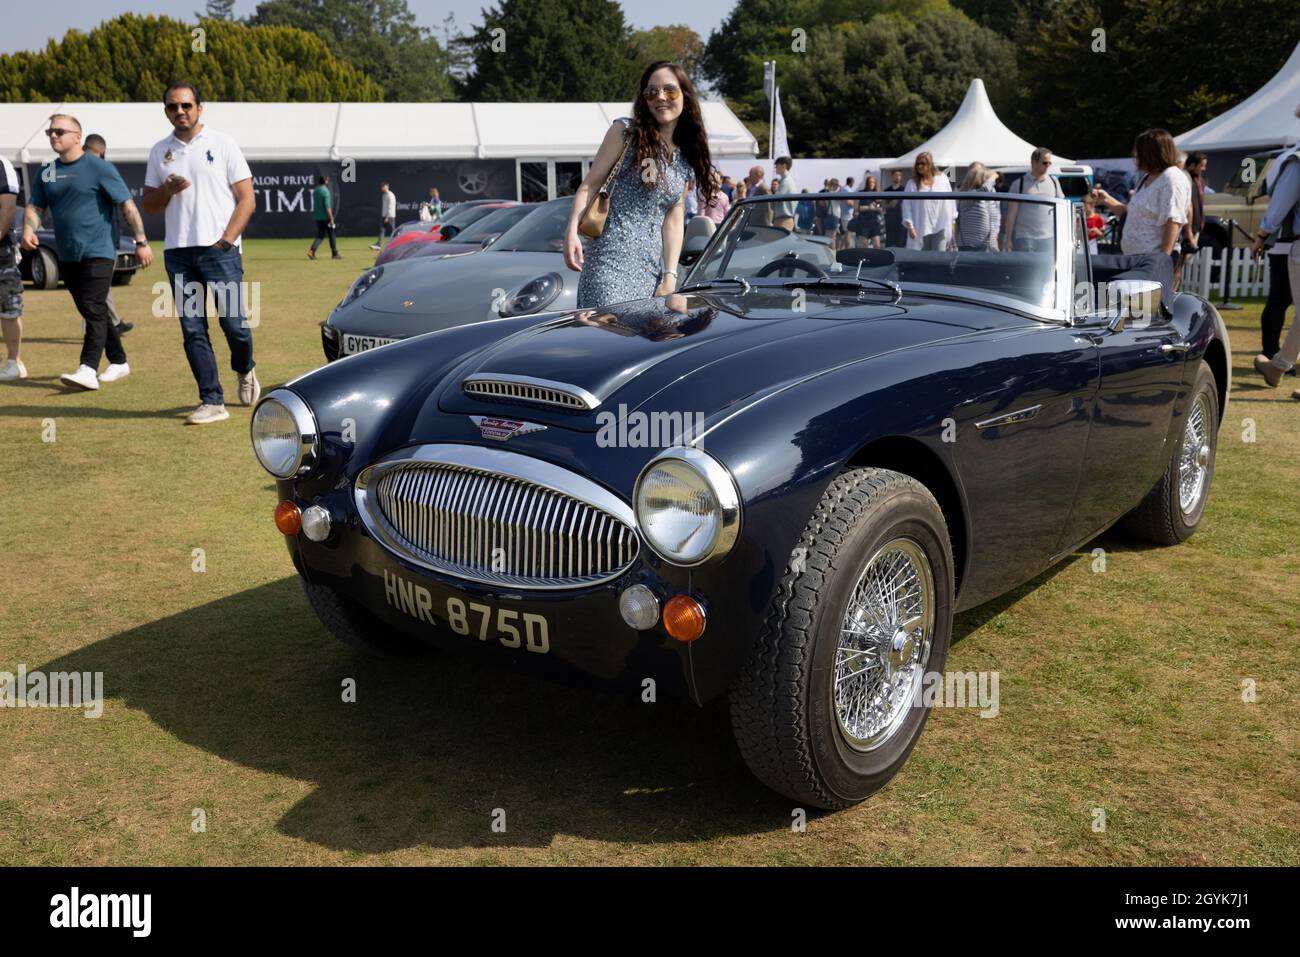 Austin-Healey 3000 ‘HNR 875D’ on display at the Concours d'Elegance held at Blenheim Palace on the 5th September 2021 Stock Photo